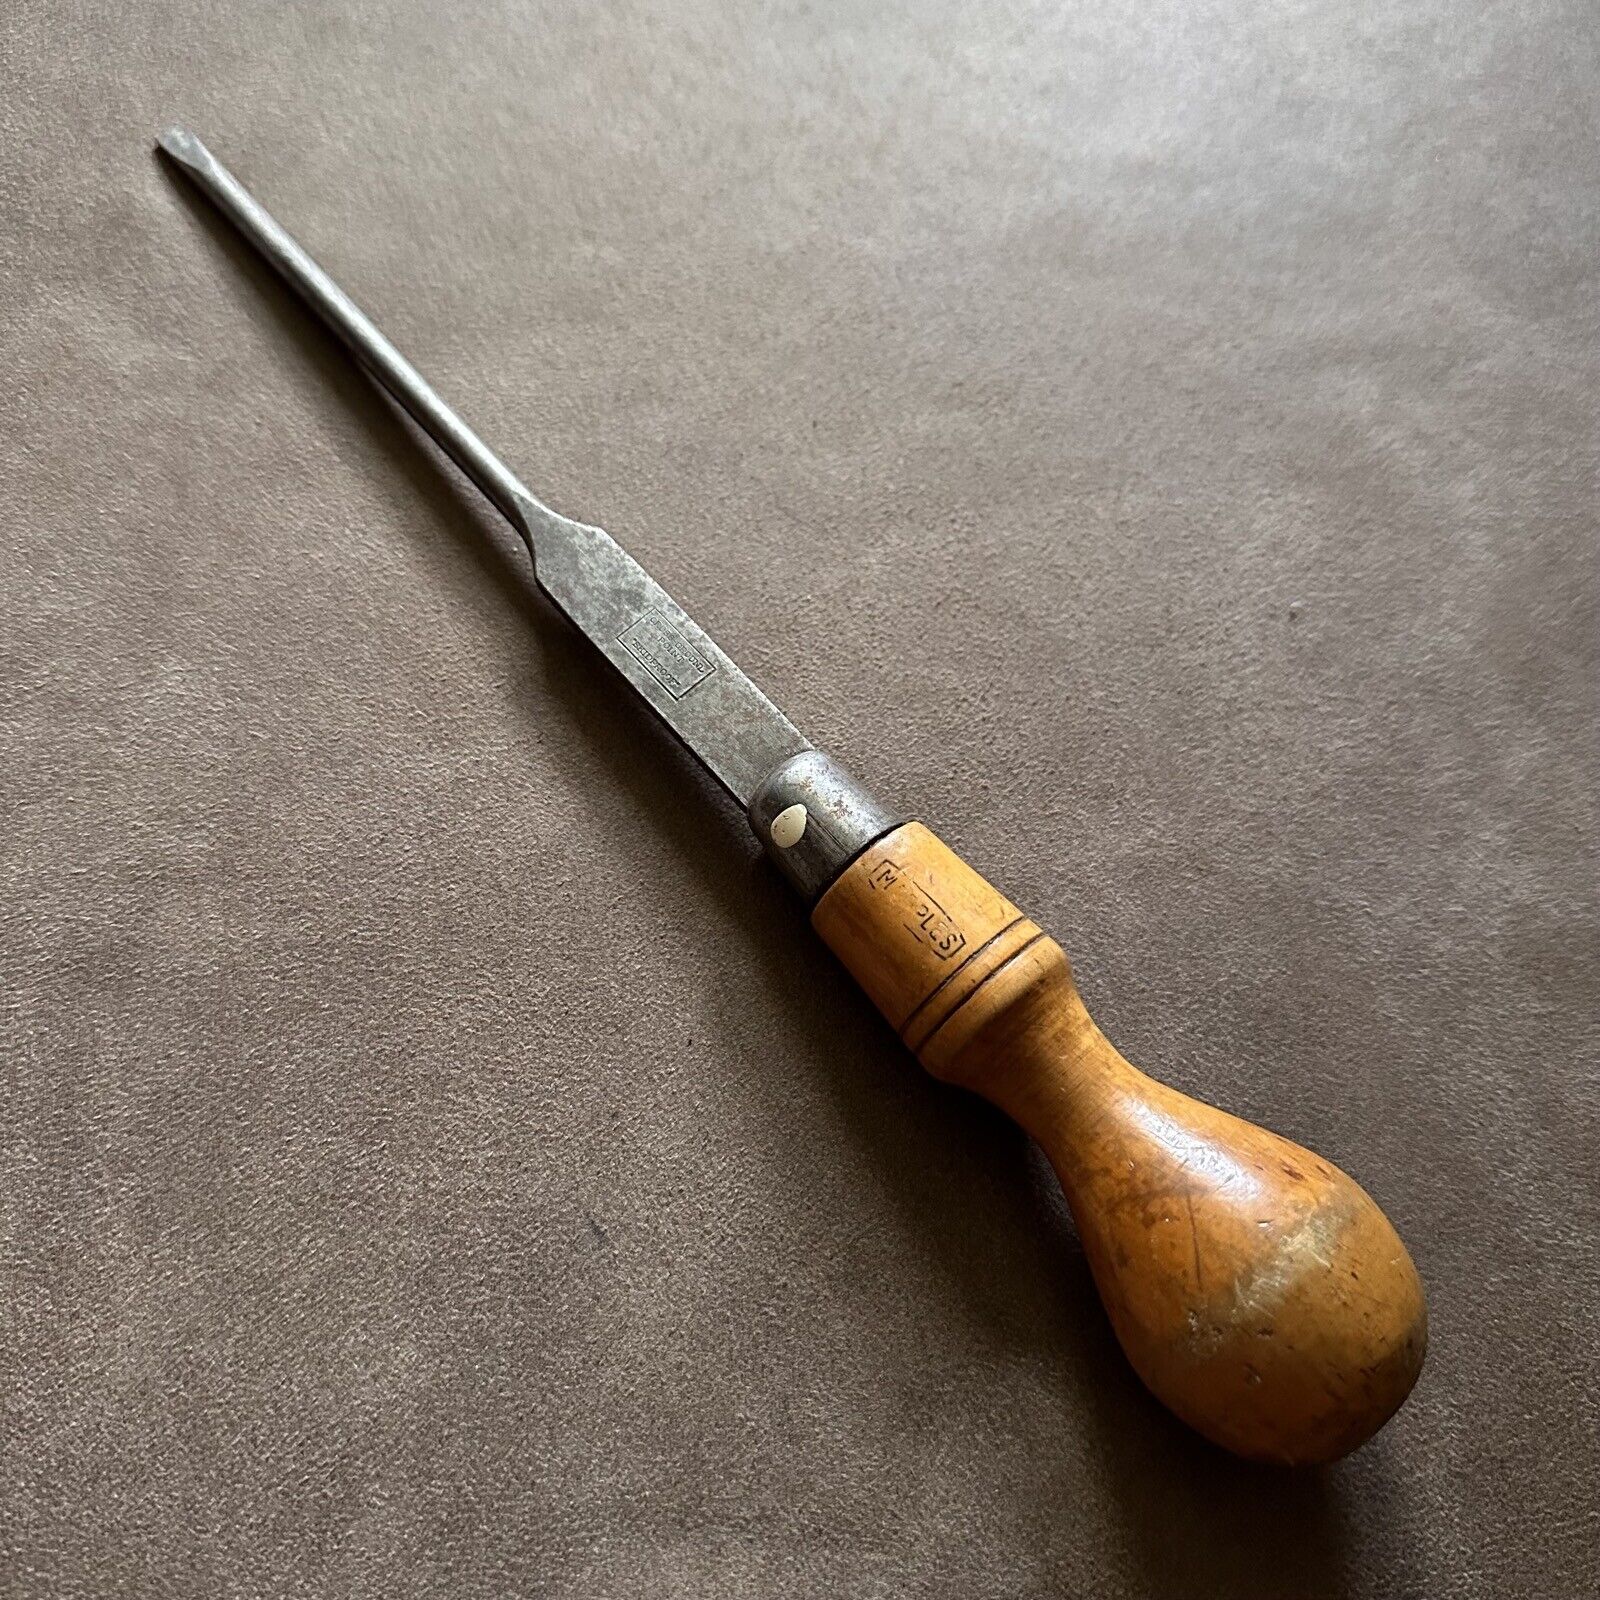 ANTIQUE MARPLES & SONS SKIDPROOF SLOTTED CABINET MAKERS SCREWDRIVER VINTAGE TOOL